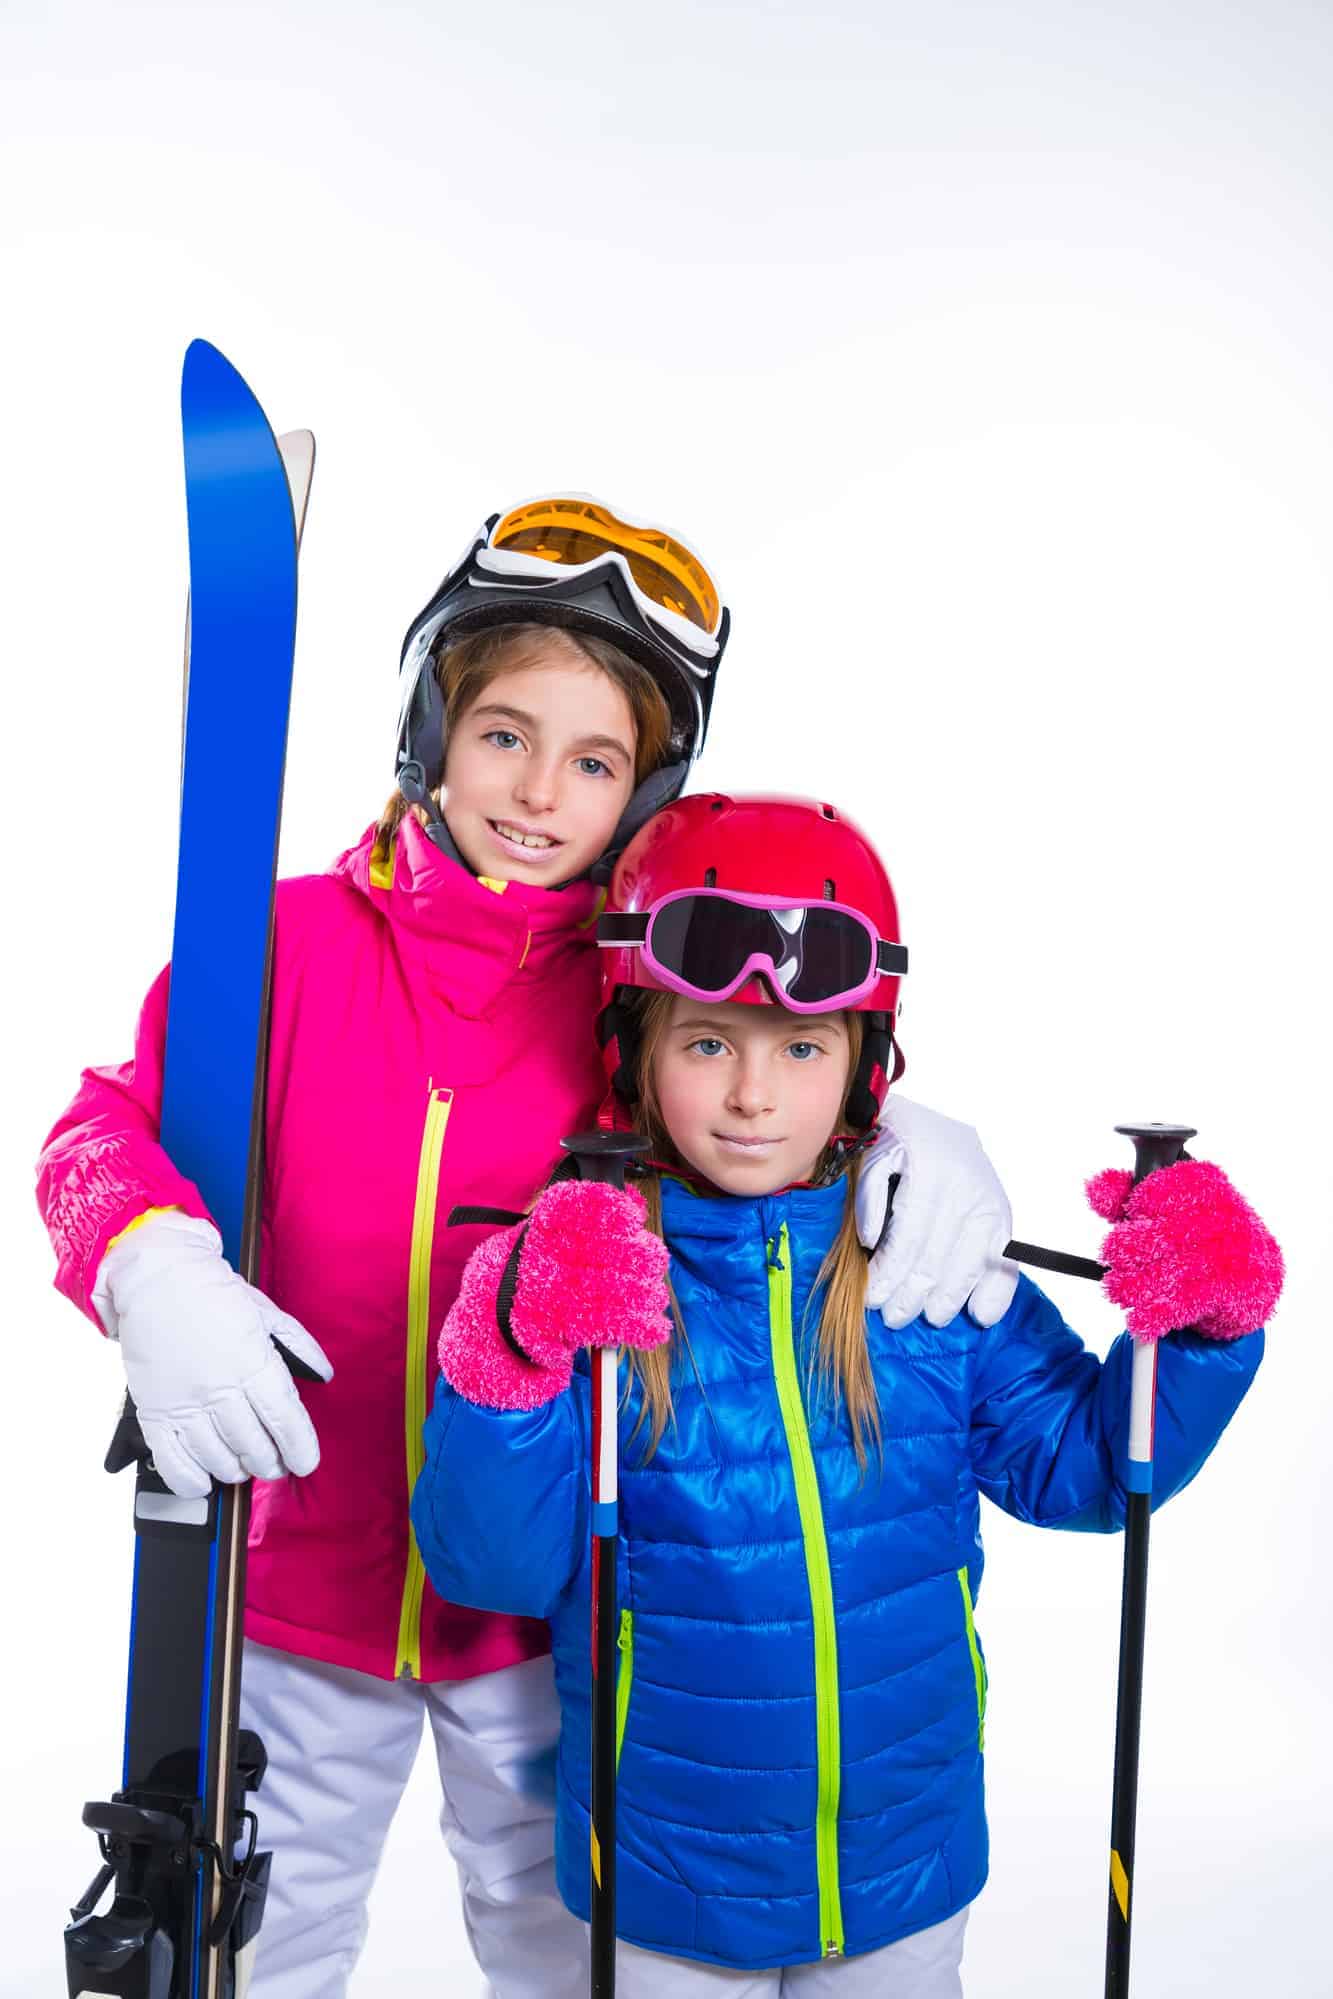 ski gloves and other gear for kids